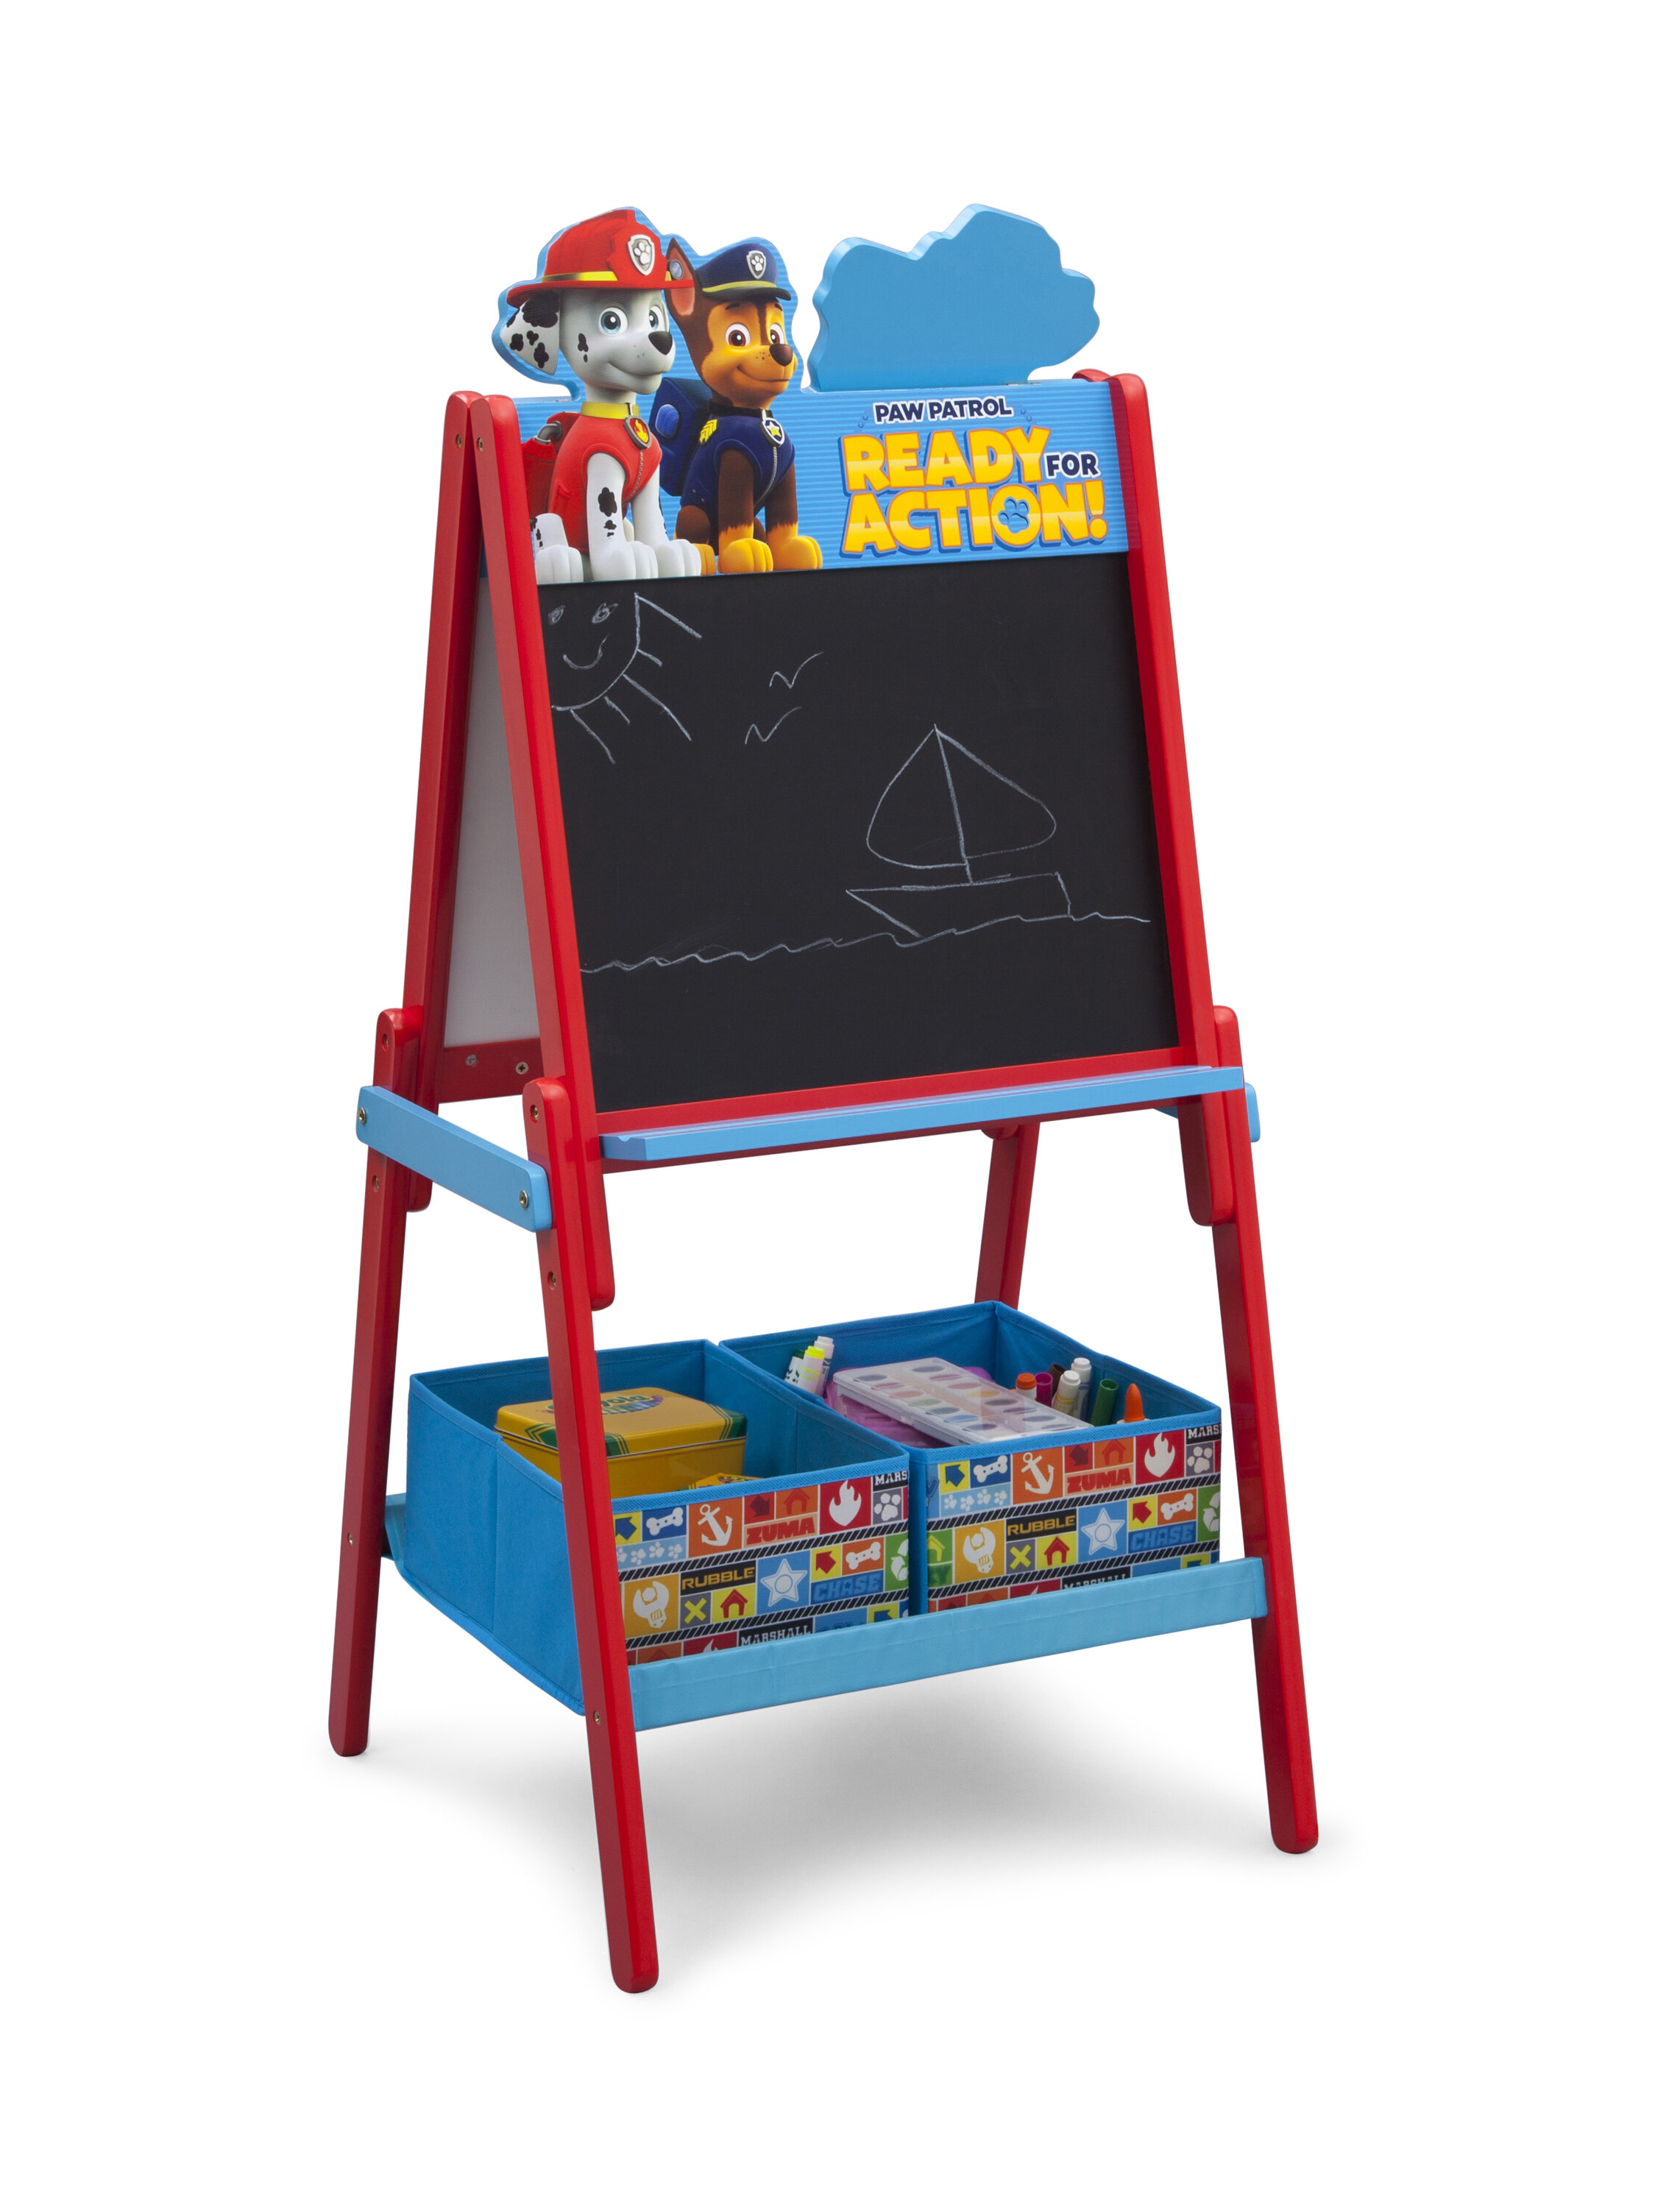 Duke Baby 3-in-1 Kids Art Easel with Dry-Erase Board, Chalkboard, Paper Roll and Art Supply Storage- Green